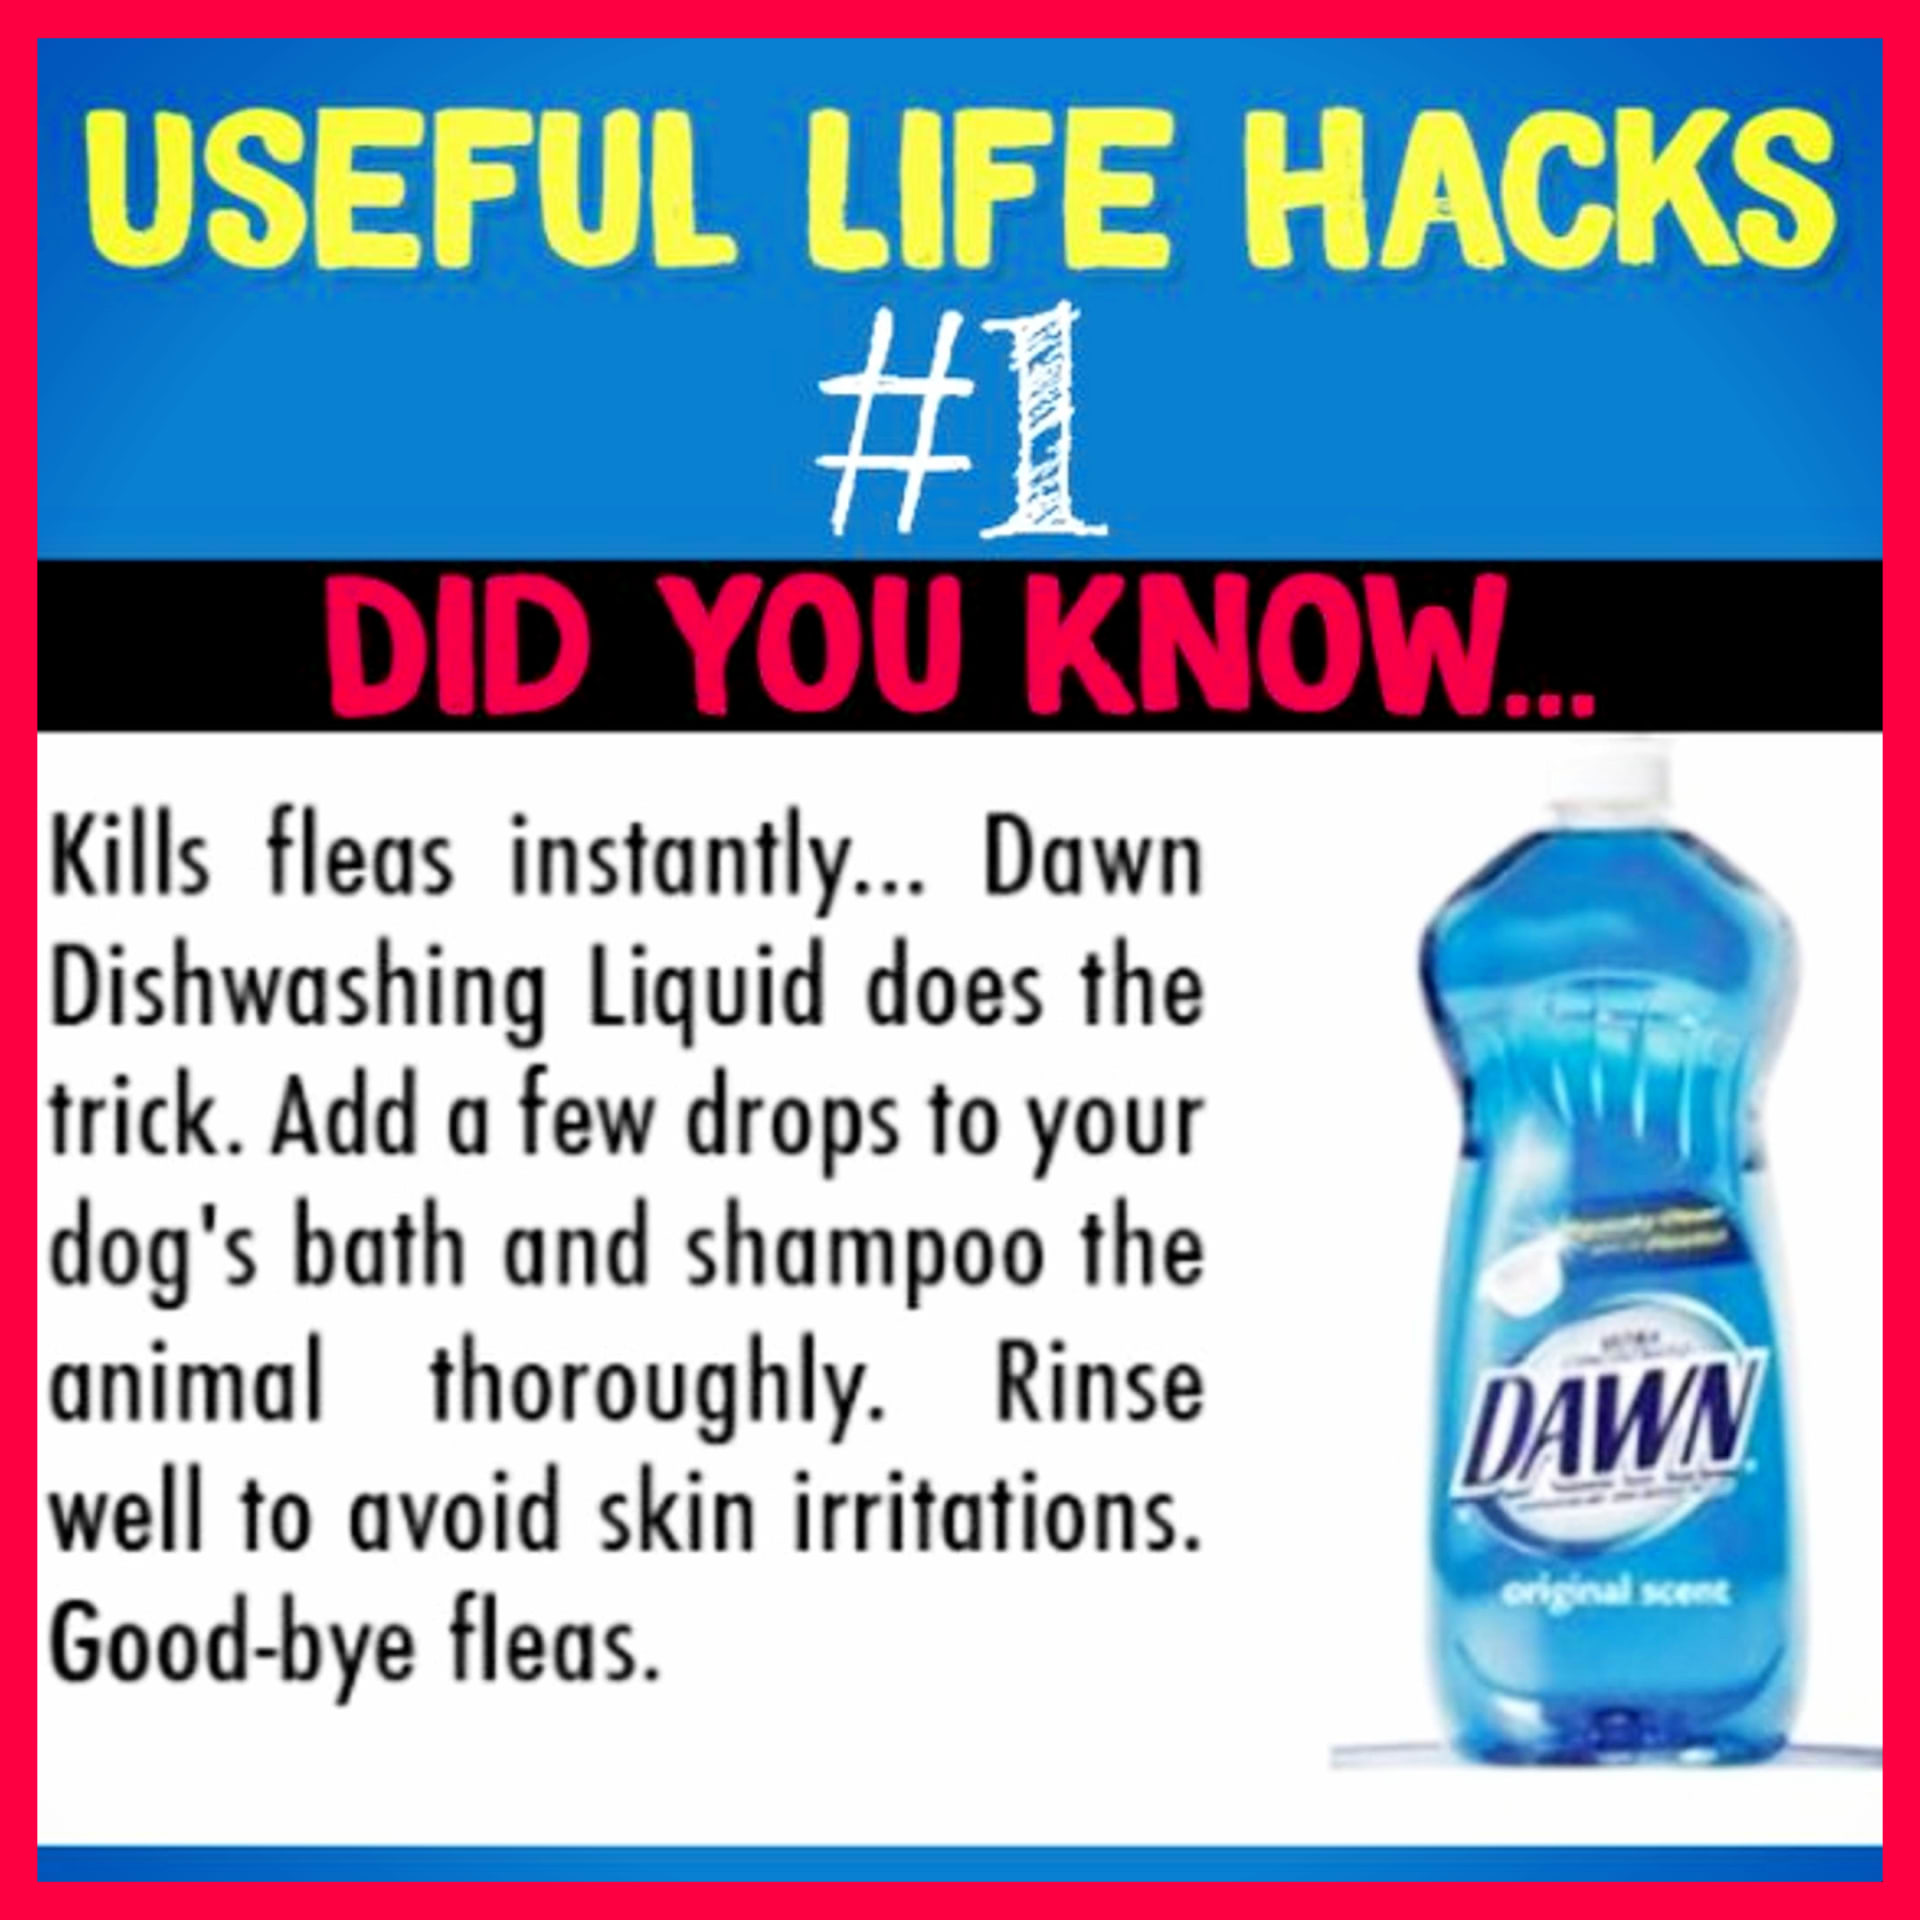 Useful Life Hacks - MIND BLOWN!  Households life hacks and good to know hacks tips and lifehacks - these household hacks, cleaning tips & tricks are such helpful hints and life changing lifehacks every girl should know.  How to get rid of fleas naturally - dawn dish soap uses